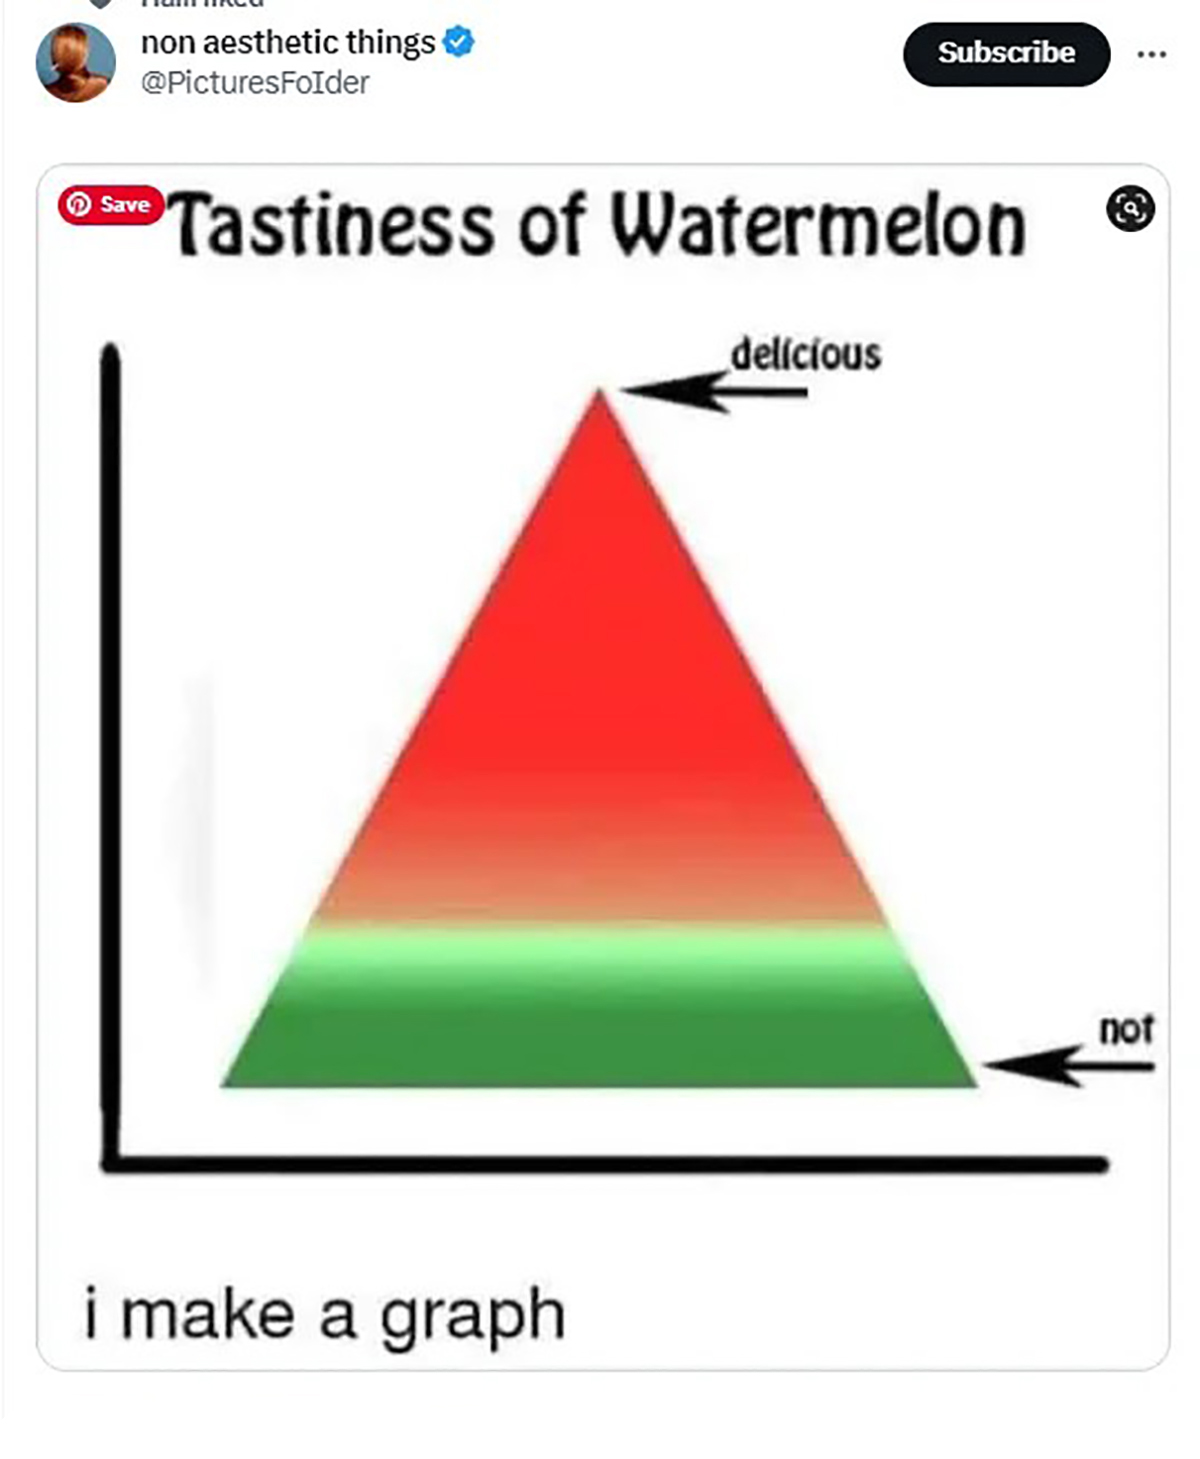 watermelon graph - non aesthetic things Save i make a graph Subscribe Tastiness of Watermelon delicious not